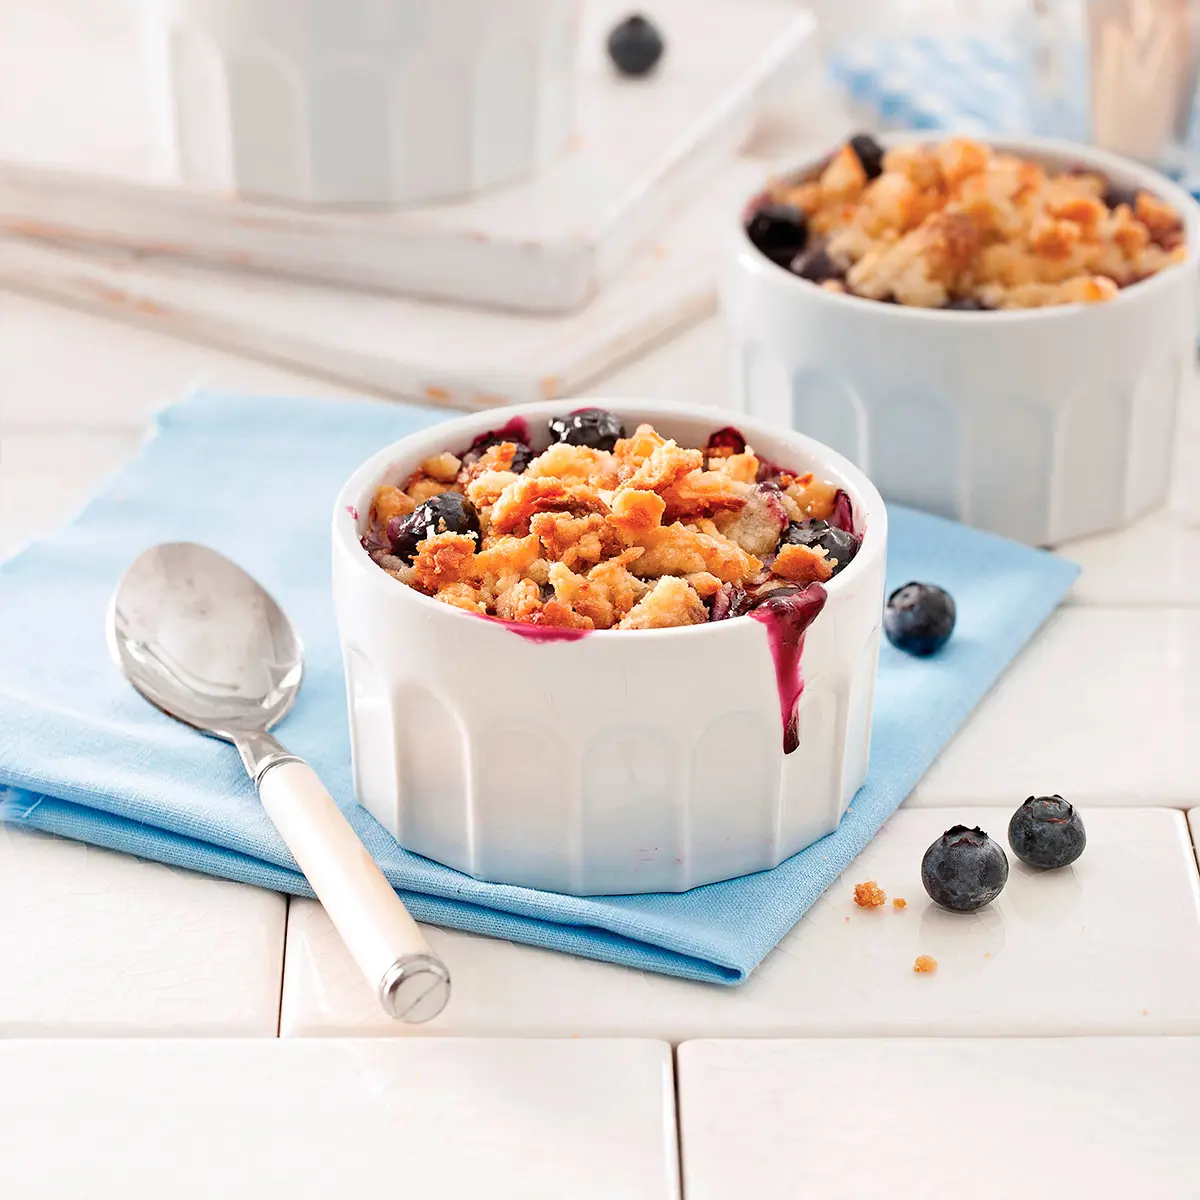 Blueberries and cassis crisp